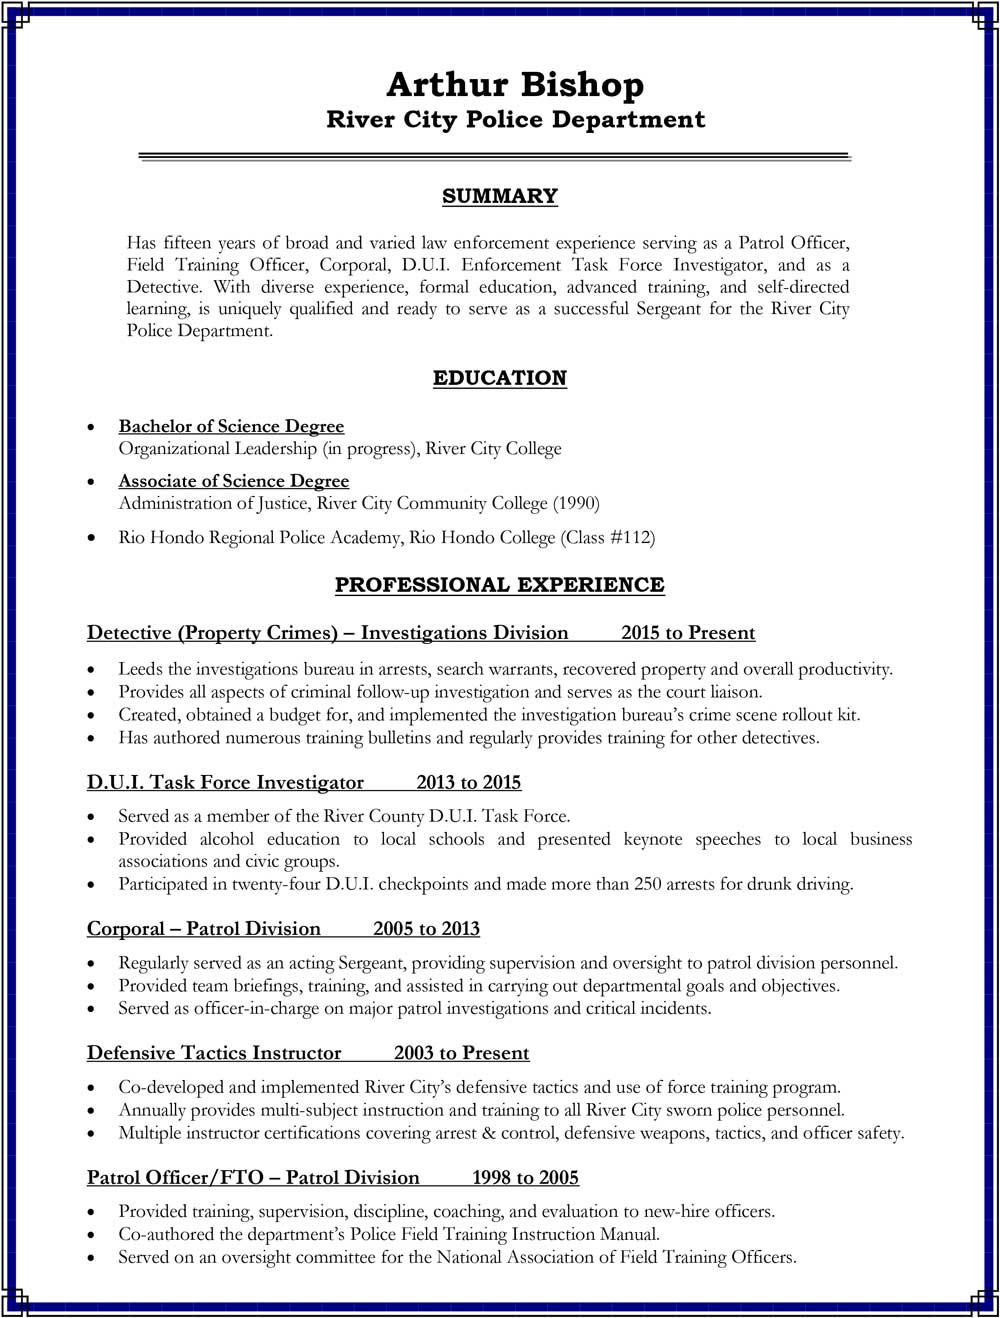 Sample Objectives for Resumes Law Enforcement Building Your Promotional Resume? Consider these Sections – Police …